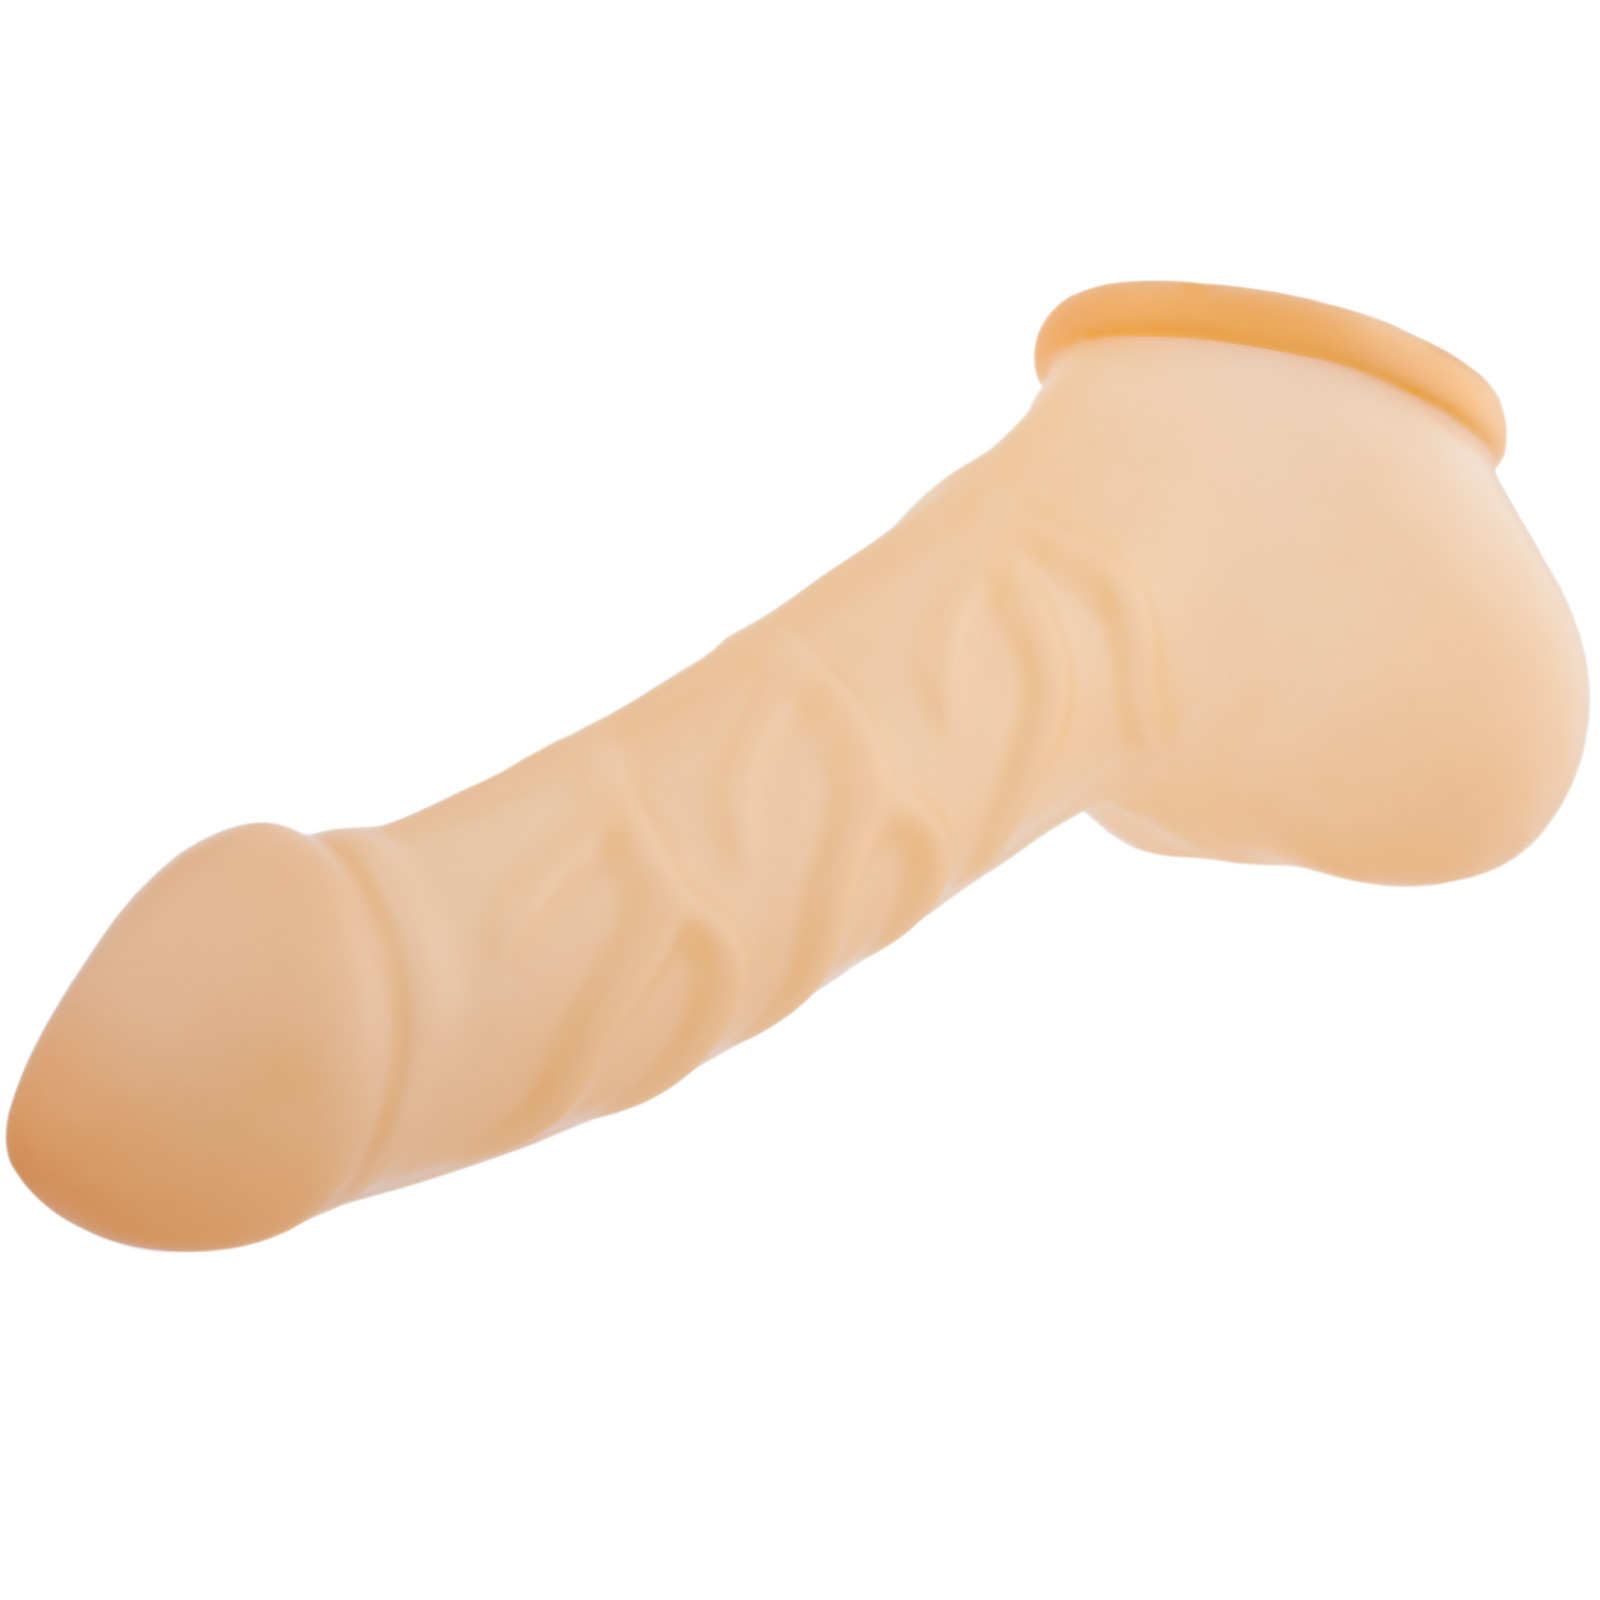 Toylie Latex Penis Sleeve «FRANZ» semi-transparent, with strong veins and molded scrotum - suitable for vegans